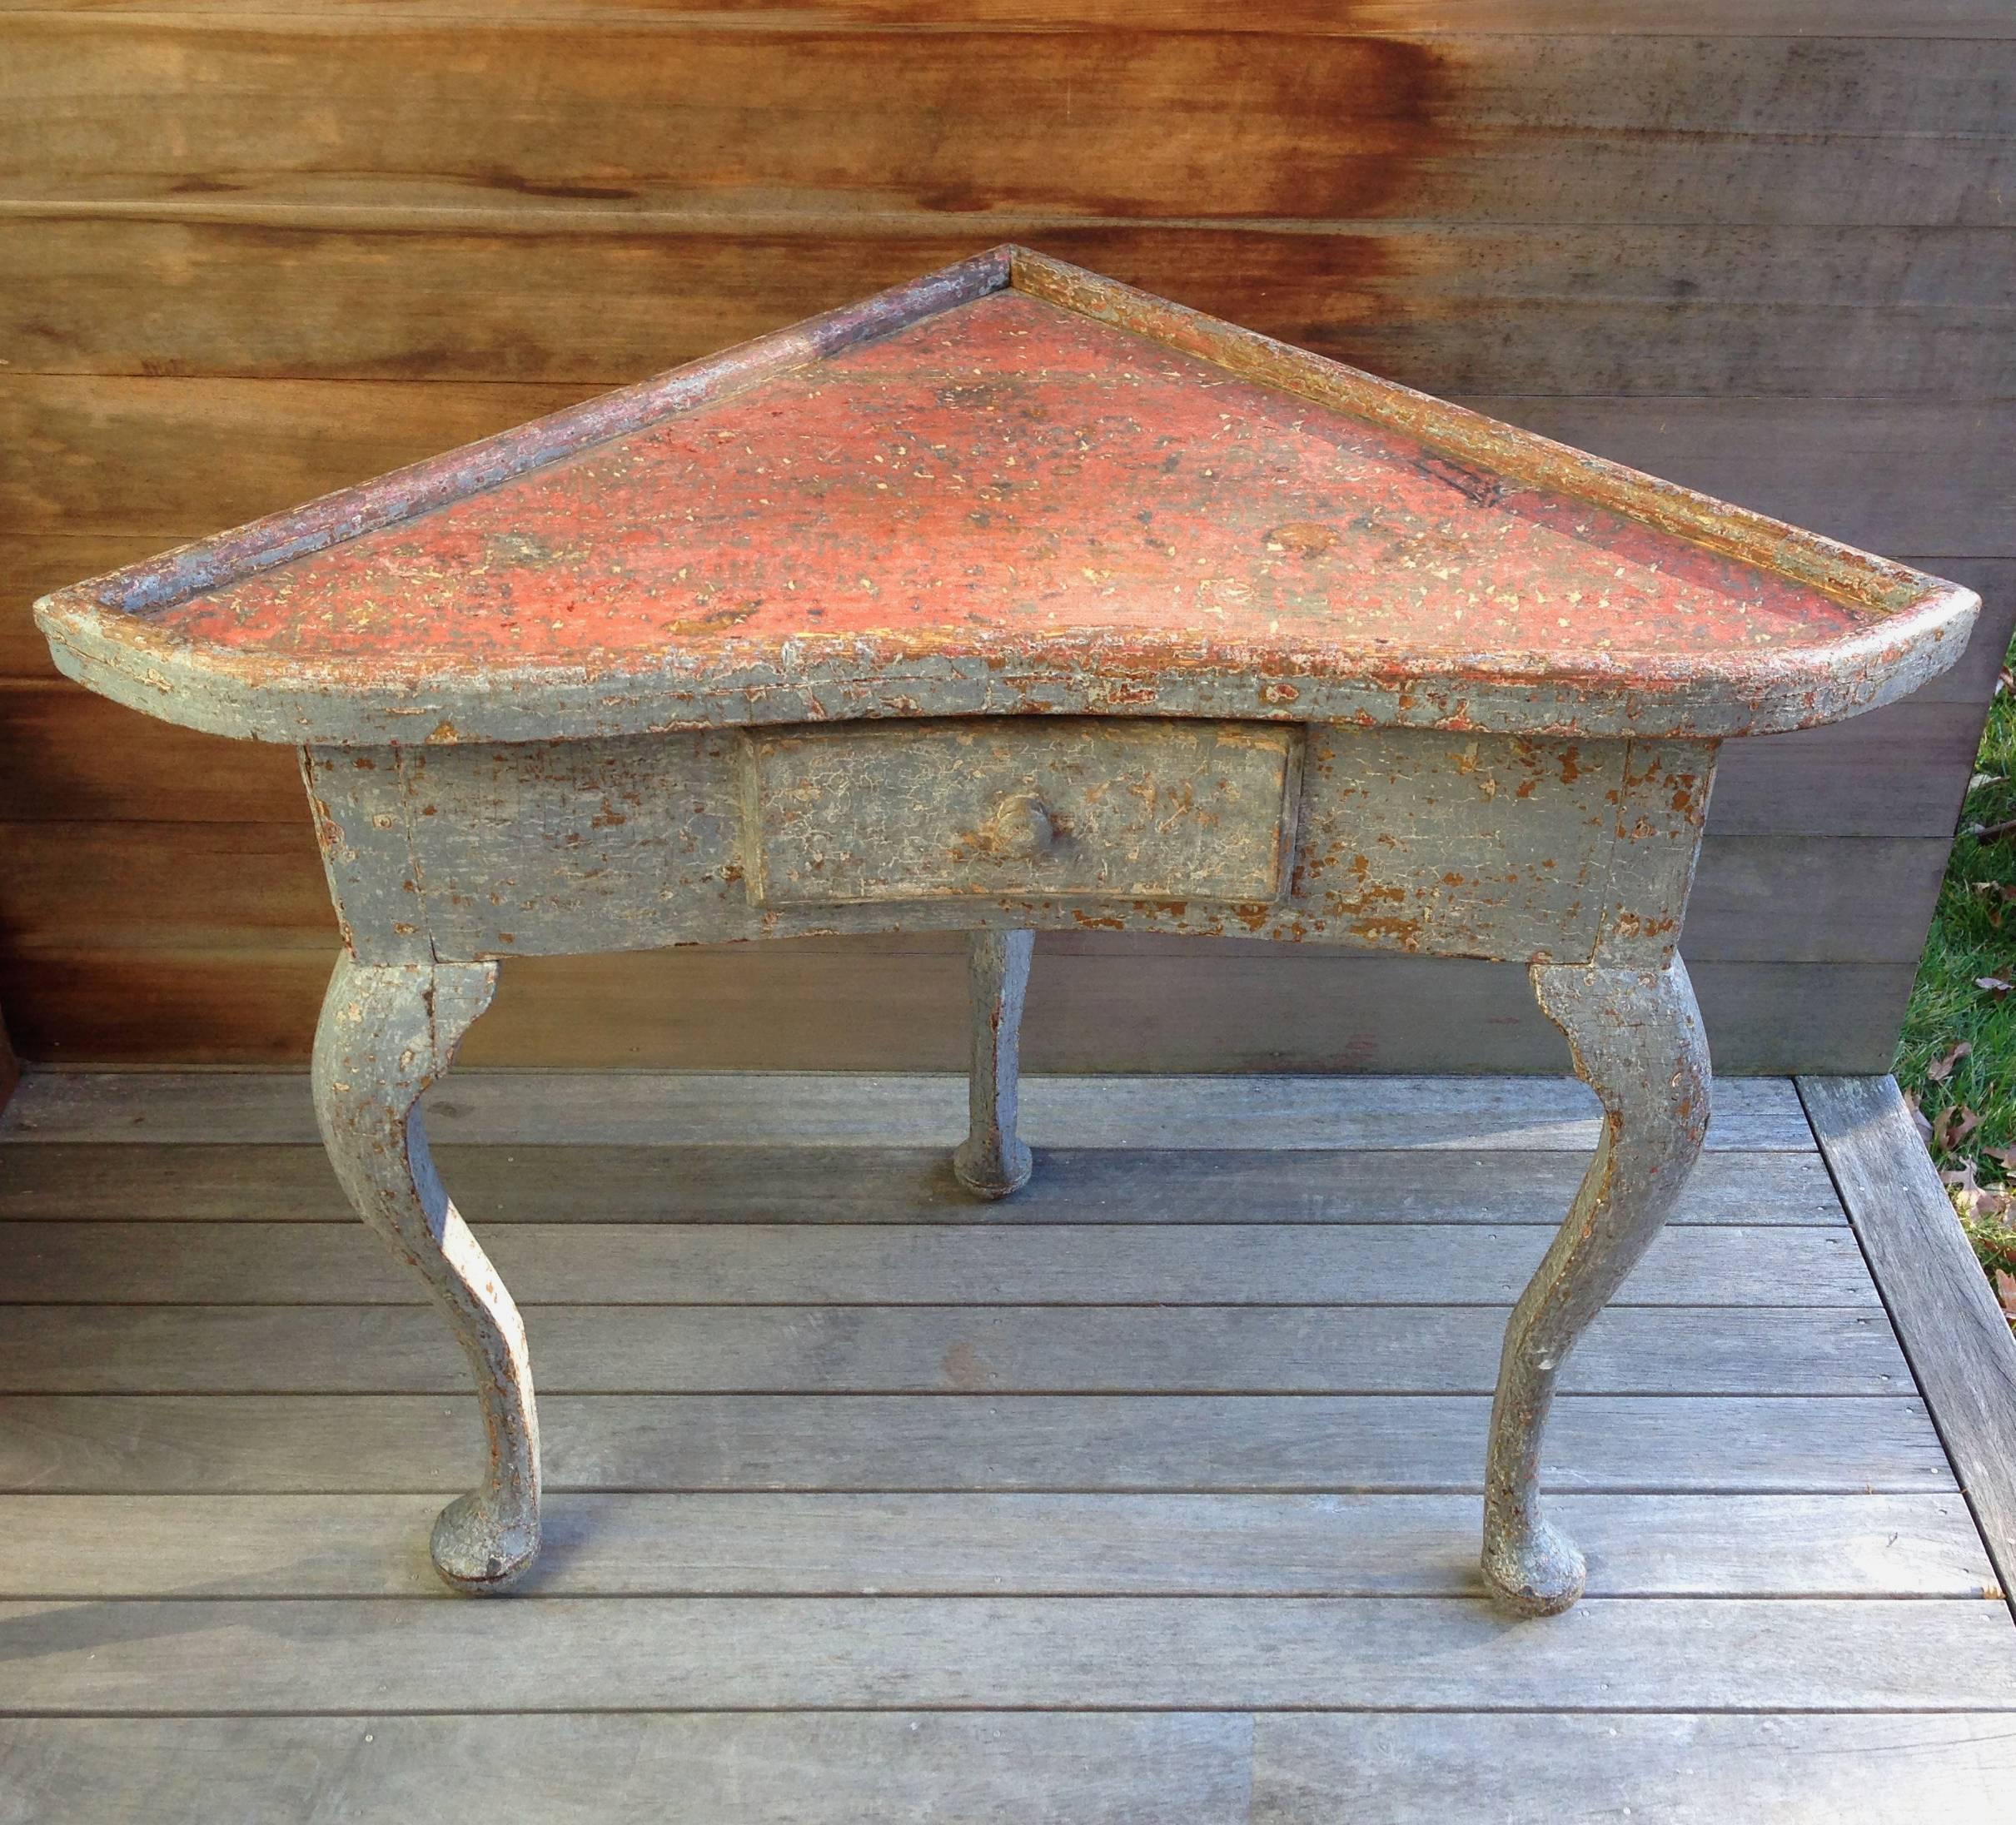 A 19th century Swedish Gustavian corner table with a raised banded edge, exhibiting a slight concave front with single drawer supported by three cabriole legs terminating in pad feet. Original painted surface.